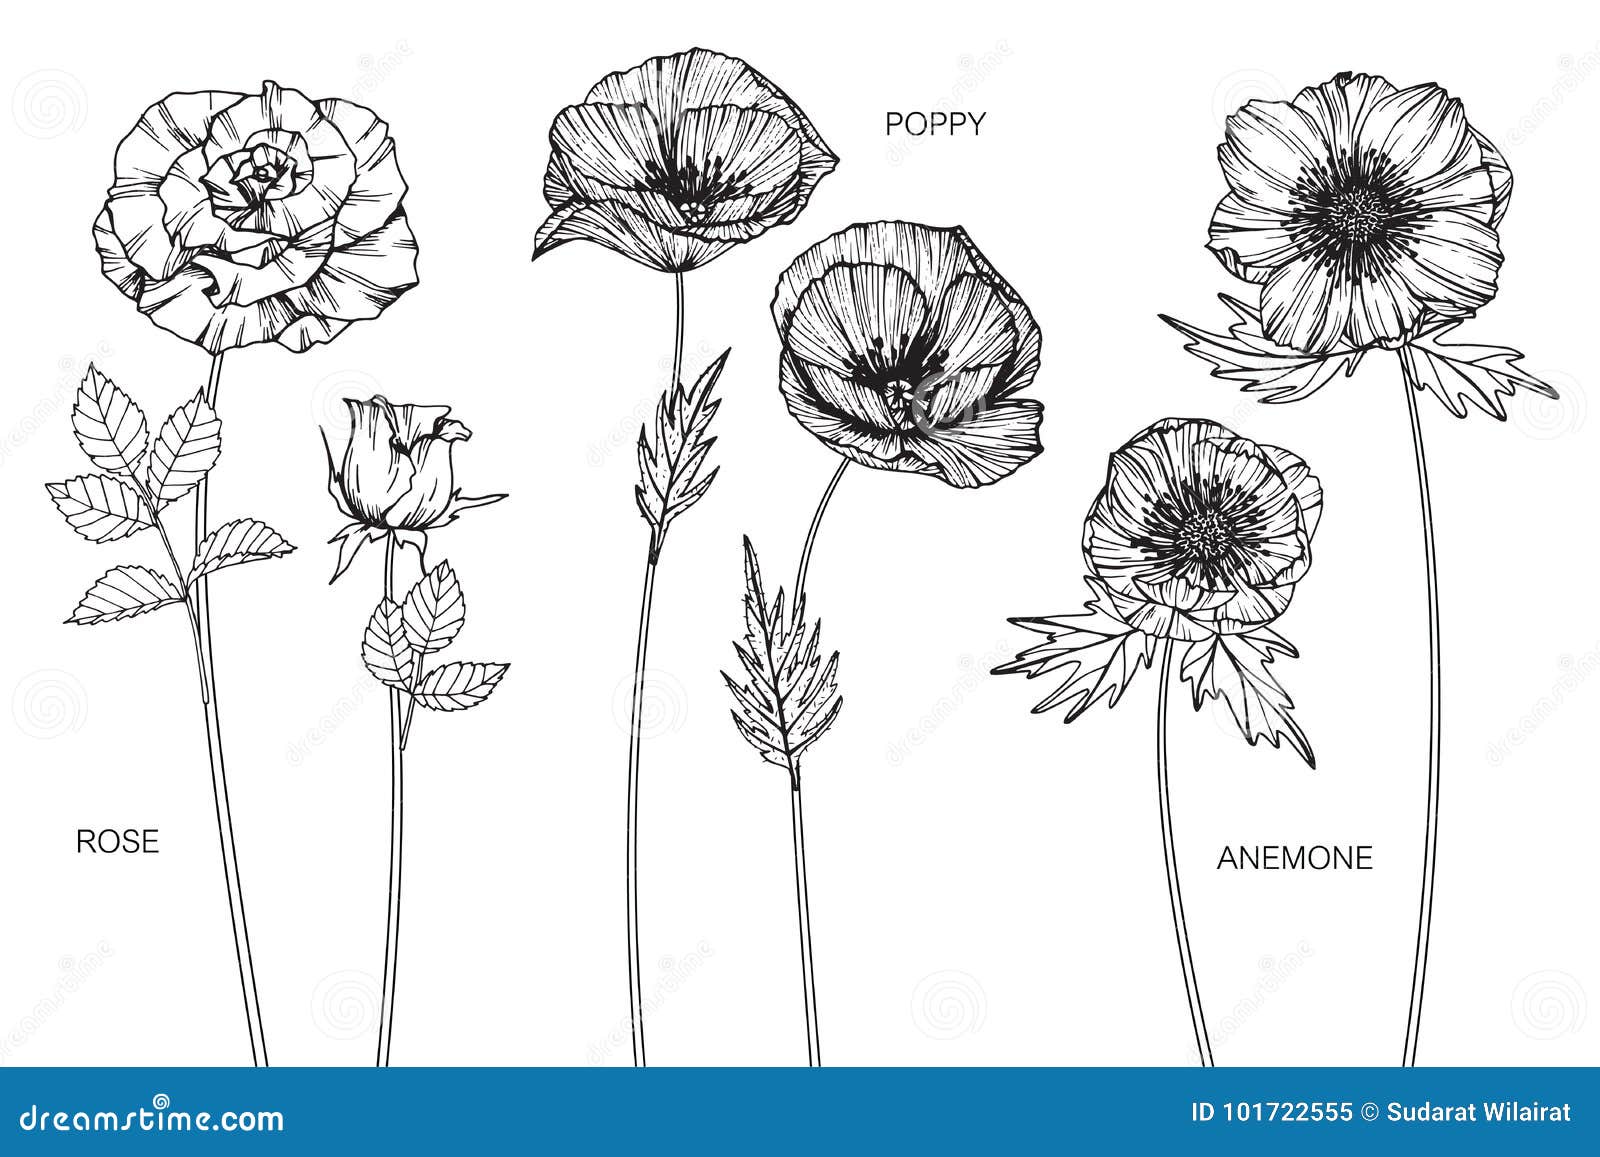 Rose Poppy Anemone Flower Drawing And Sketch Stock Illustration